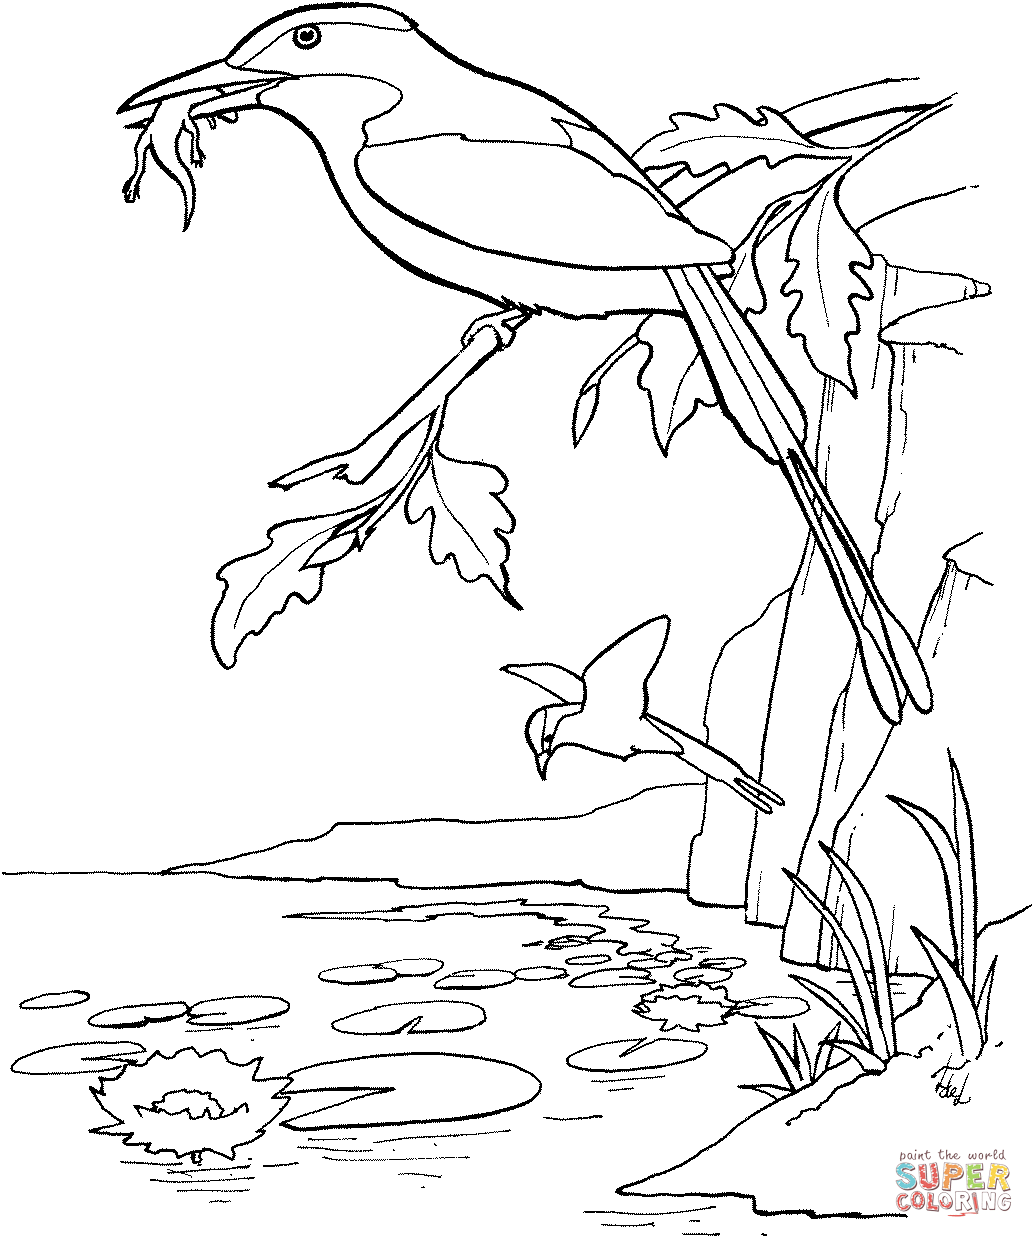 Pink-Breasted Kingfisher coloring page | Free Printable Coloring Pages